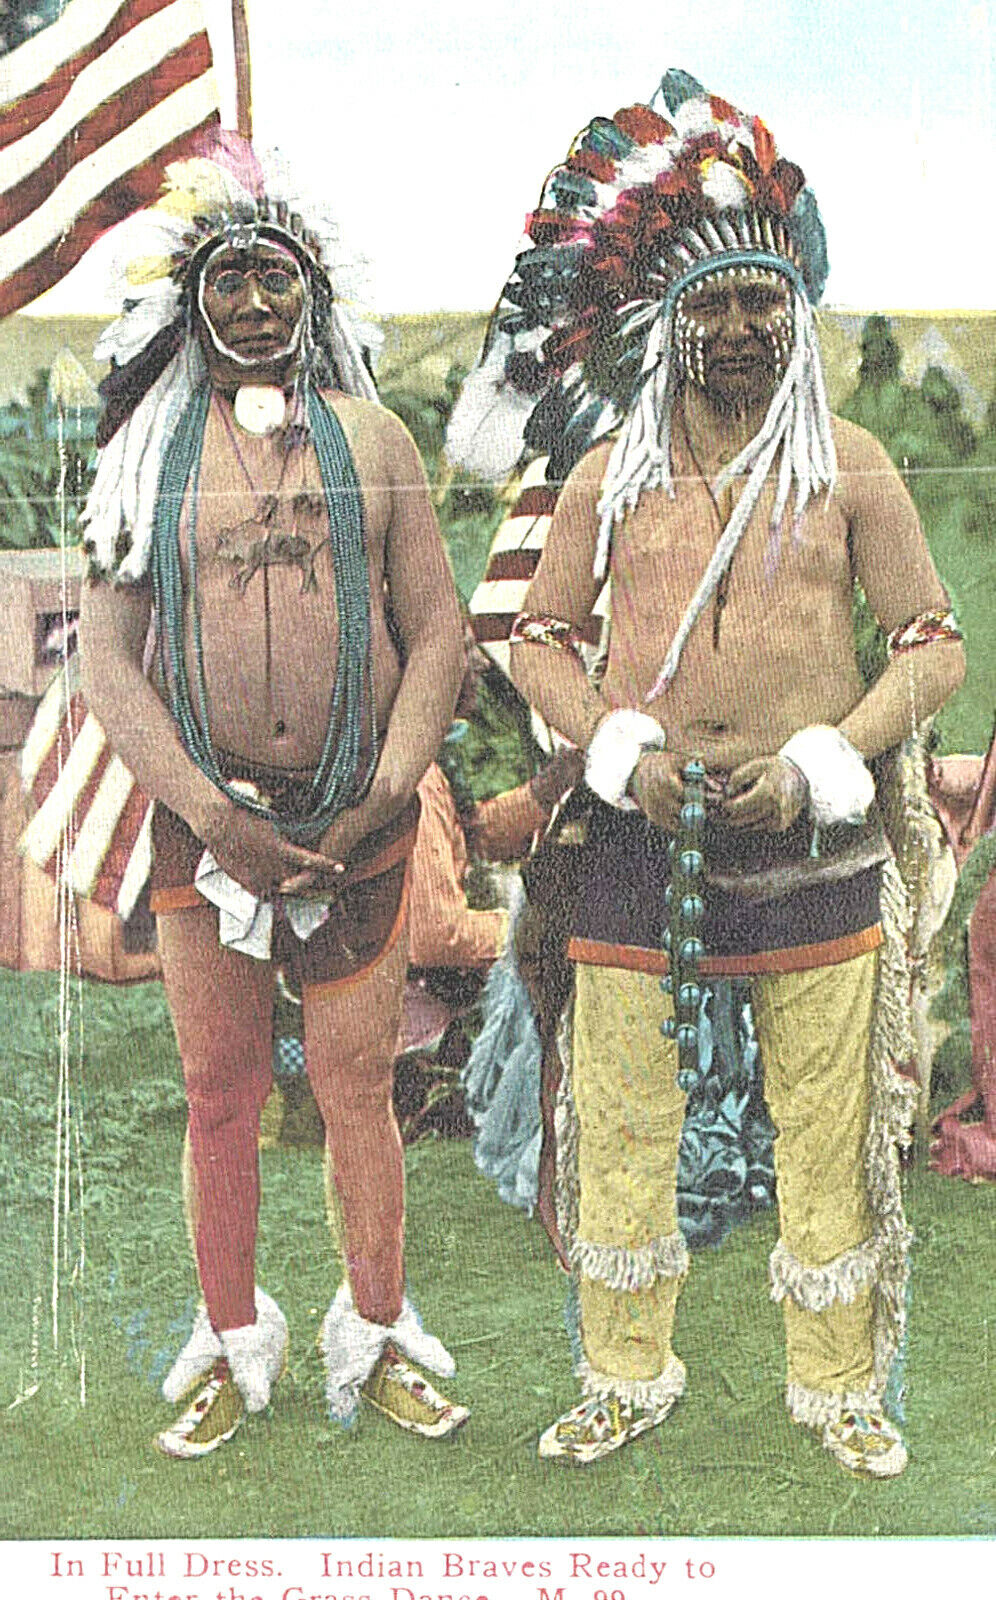 VIntage Postcard-In Full Dress, Indian Braves Ready to Enter the Grass Dance,M99